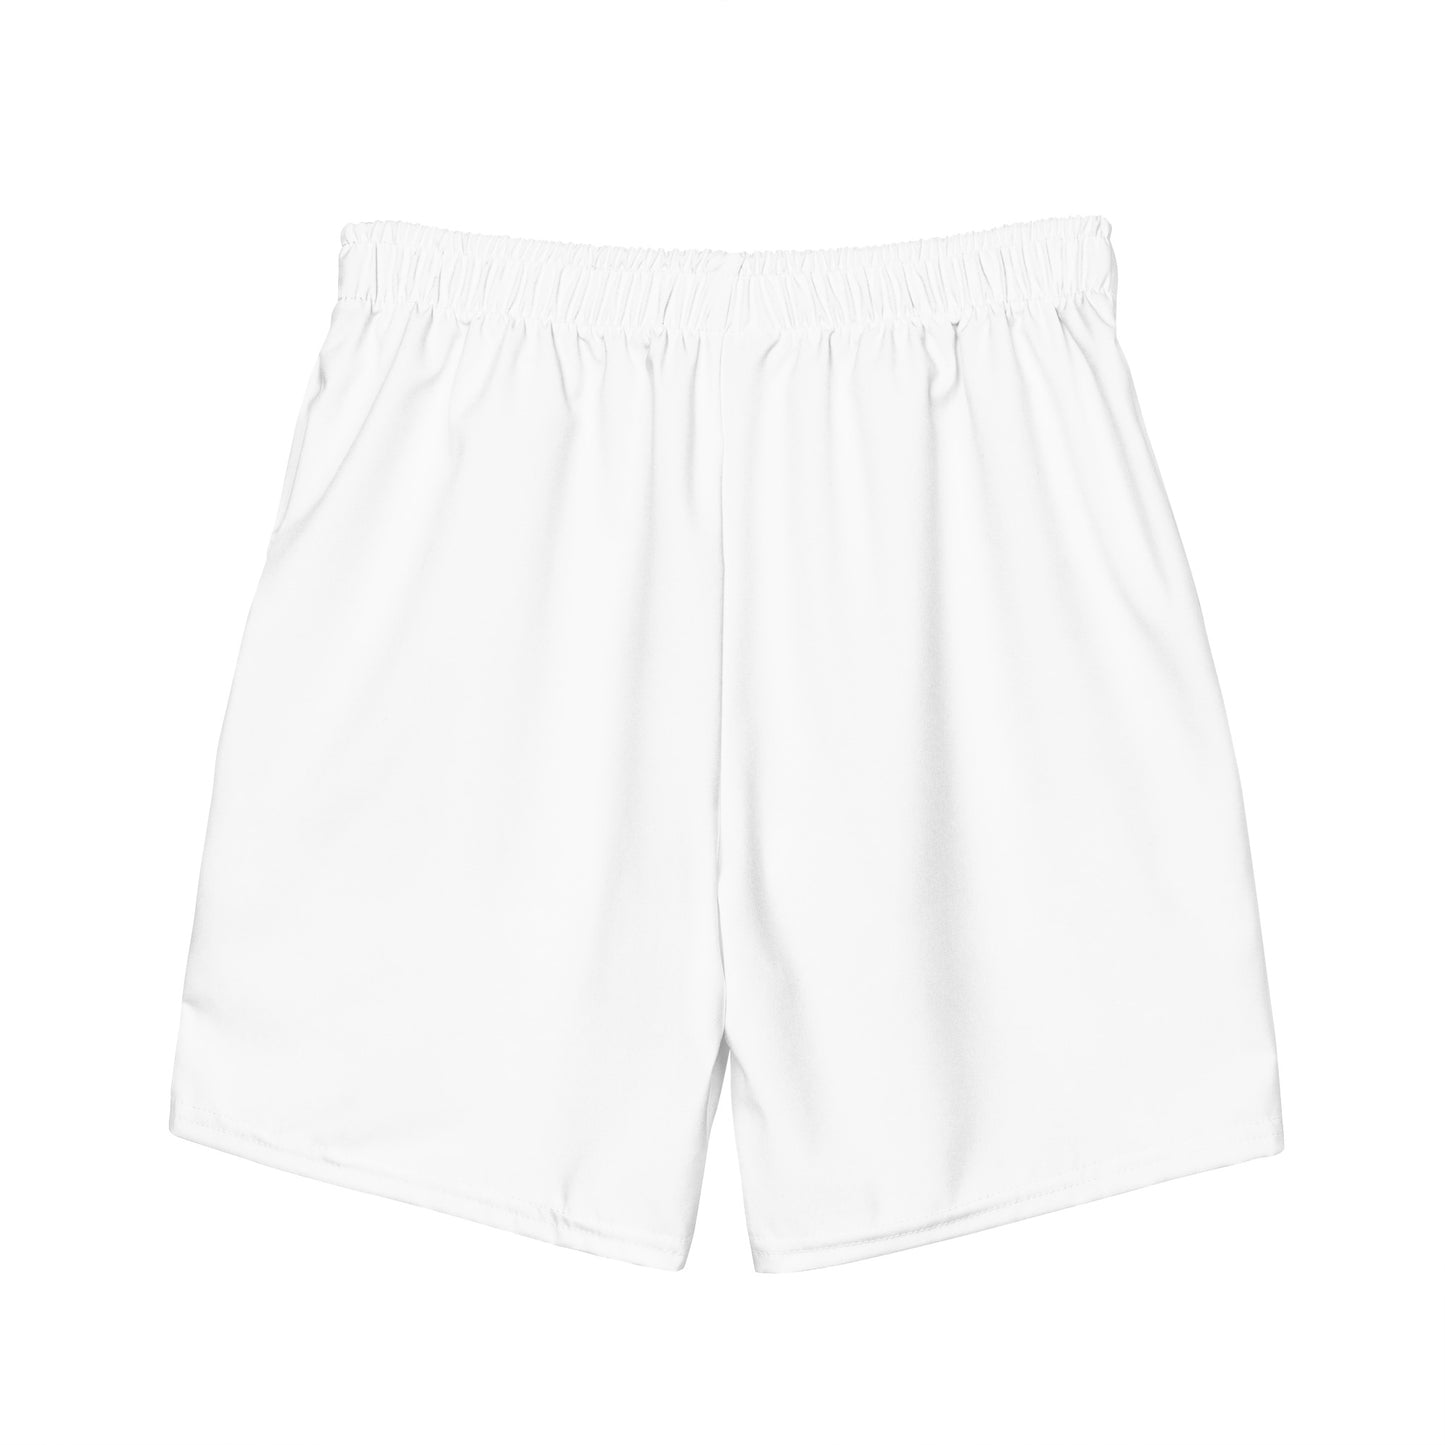 Zup Zup (Black Text) Recycled Swim Trunks